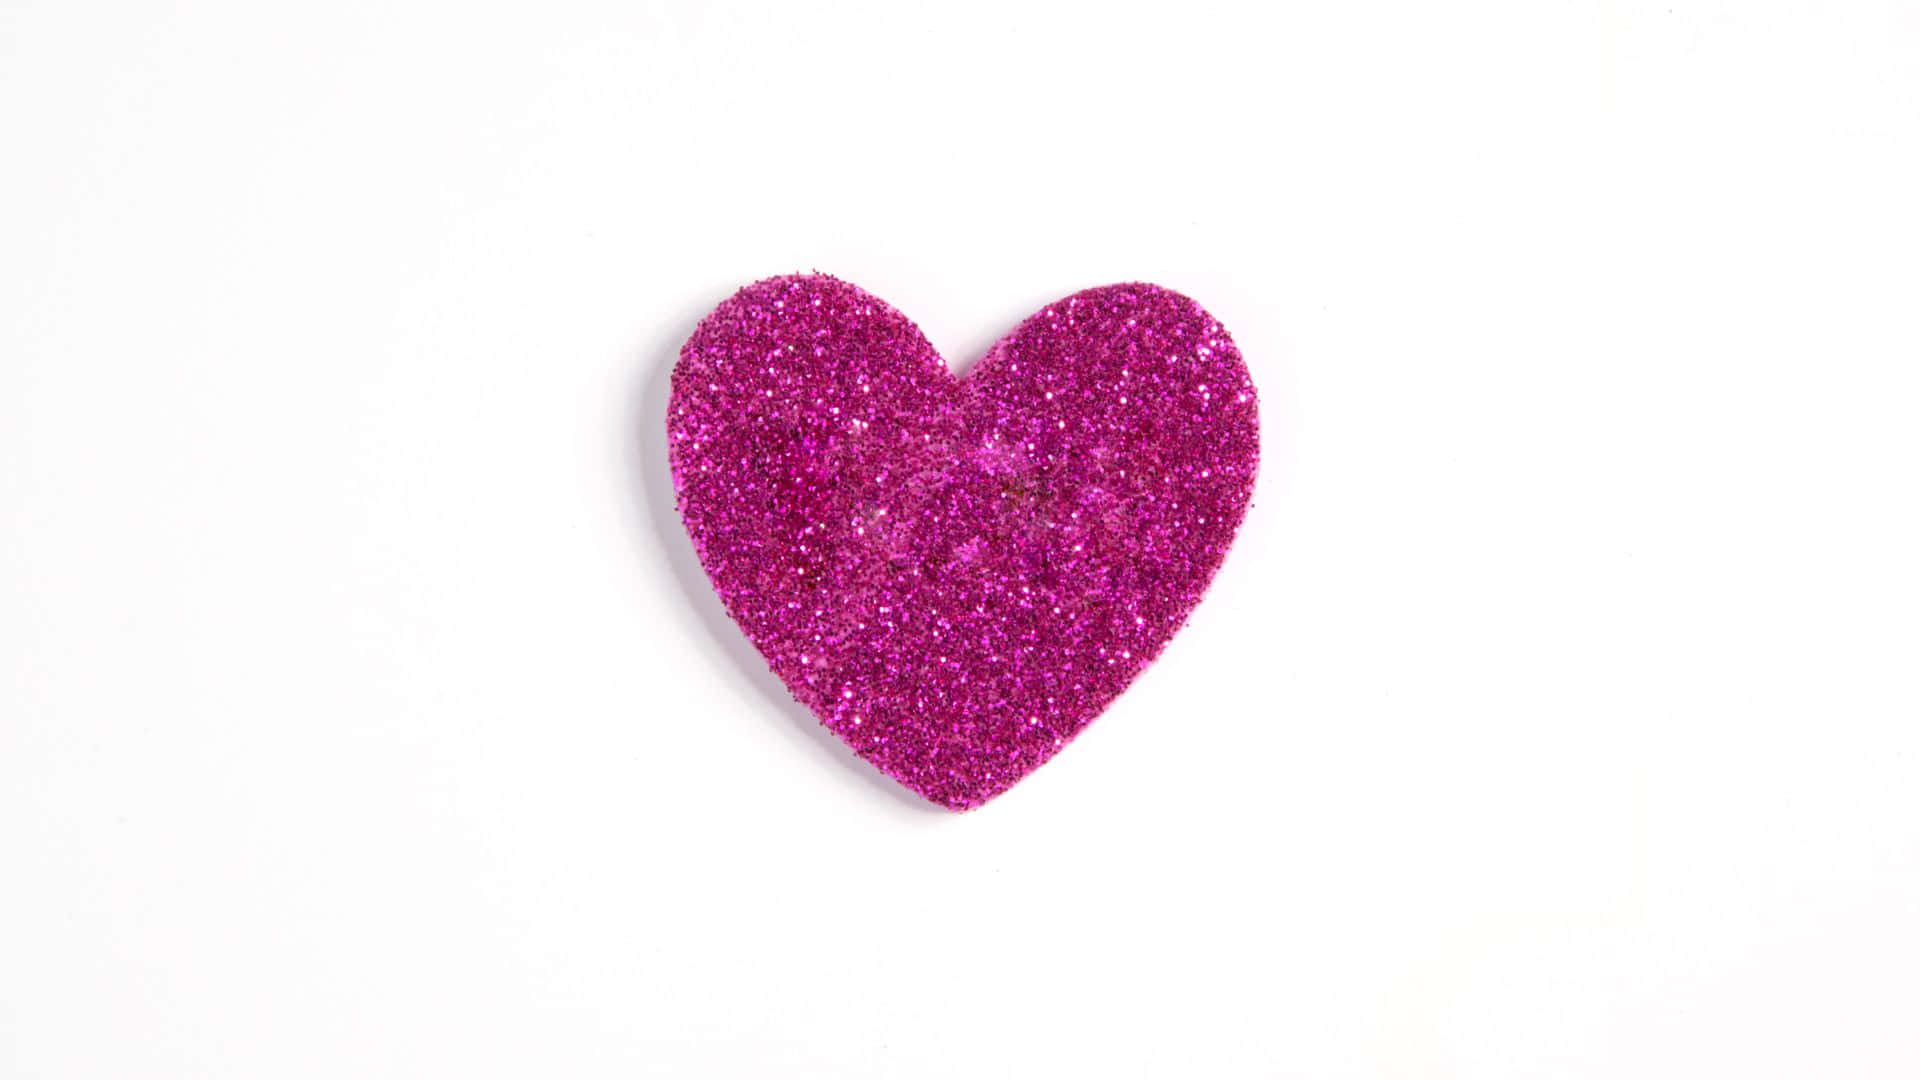 A Pink Glitter Heart Shaped Sticker On A White Background